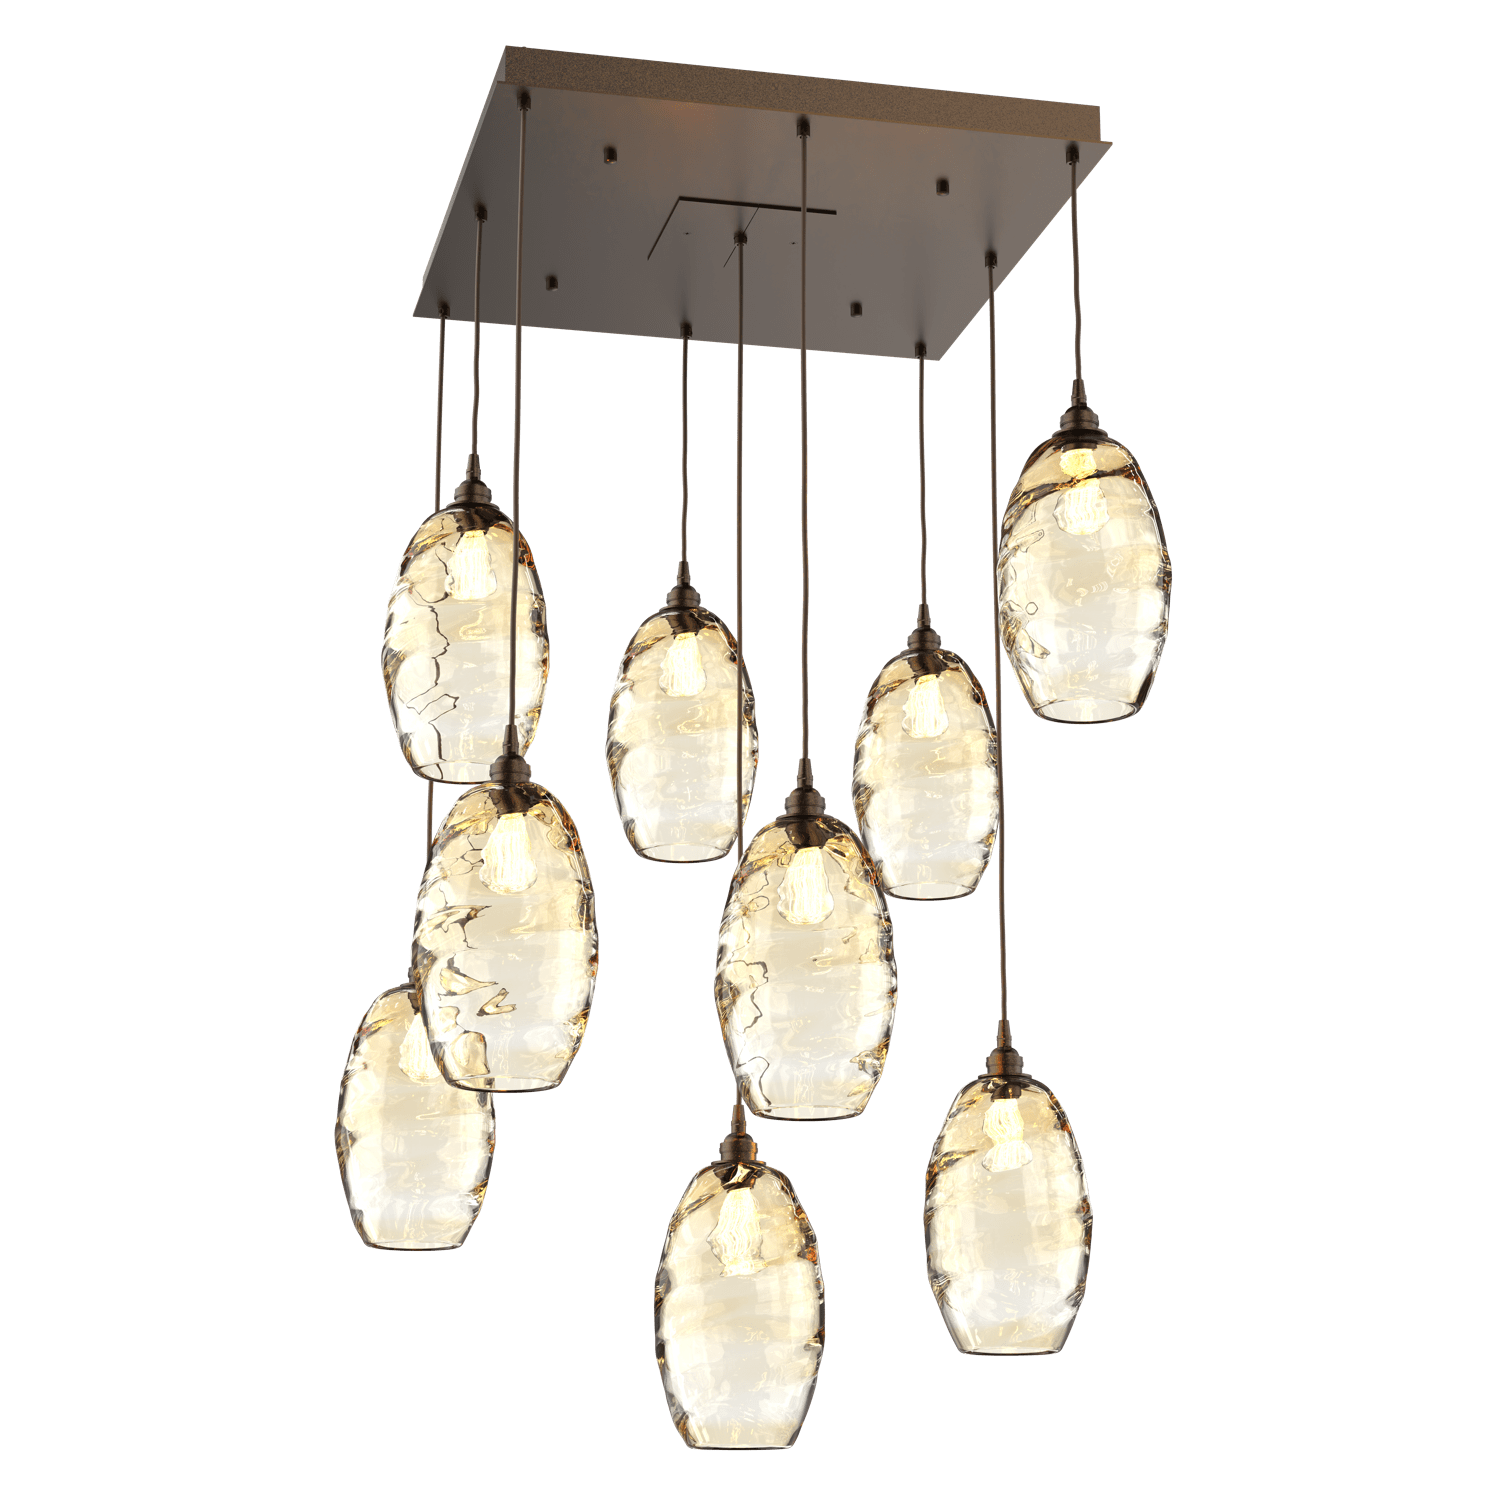 CHB0035-09-FB-OA-Hammerton-Studio-Optic-Blown-Glass-Elisse-9-light-square-pendant-chandelier-with-flat-bronze-finish-and-optic-amber-blown-glass-shades-and-incandescent-lamping